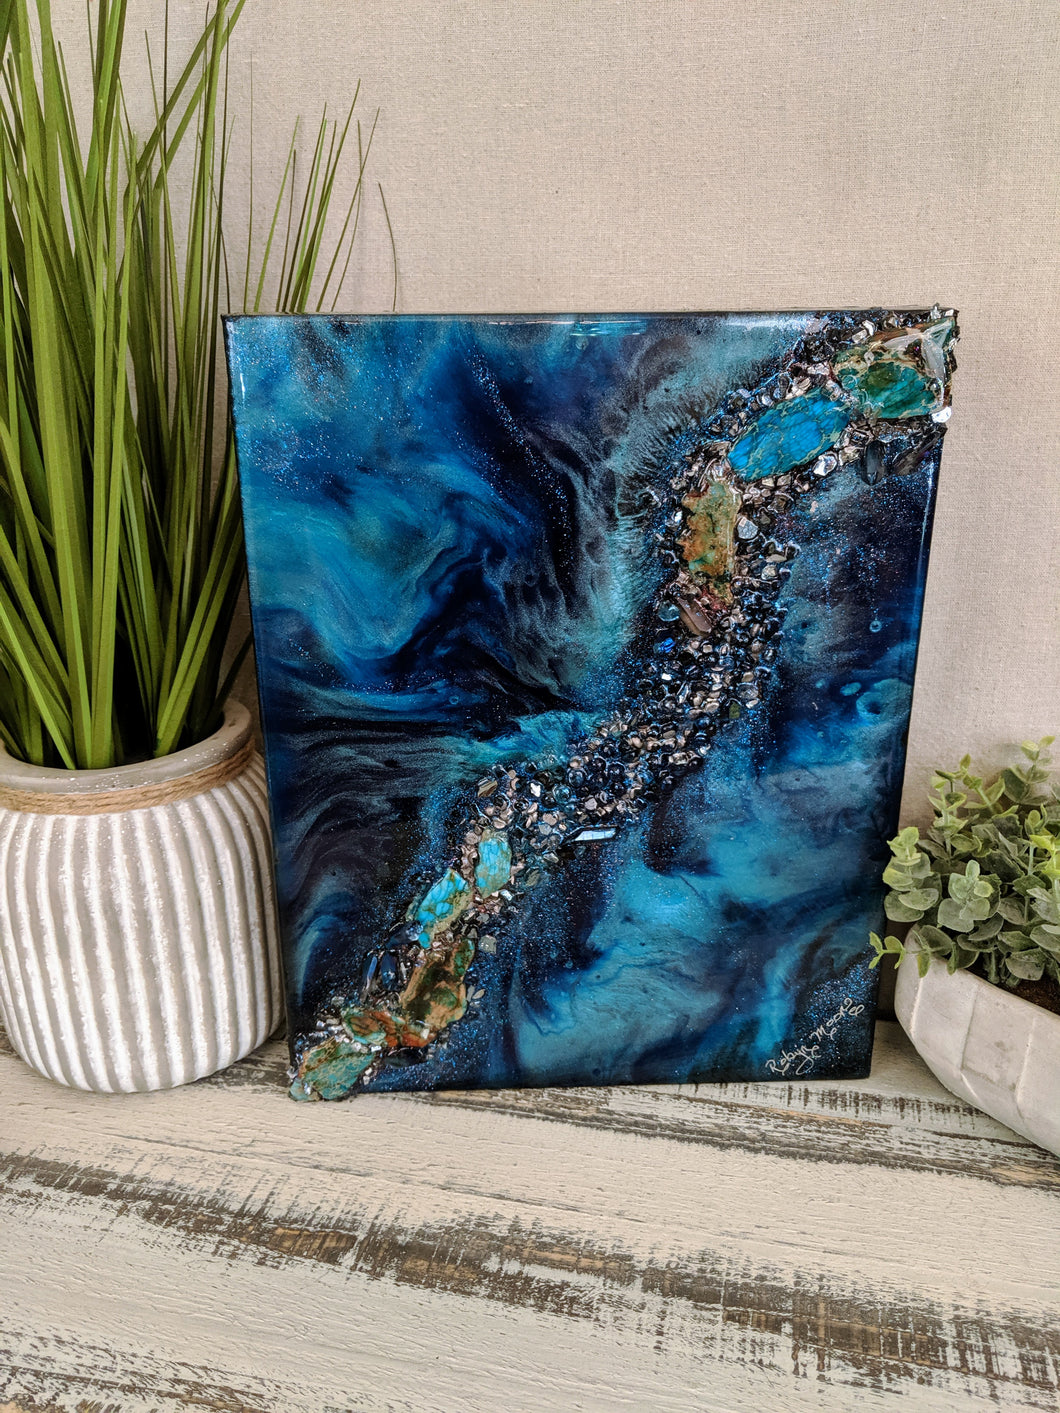 abstract blue teal resin art with turquoise crystals and fire glass